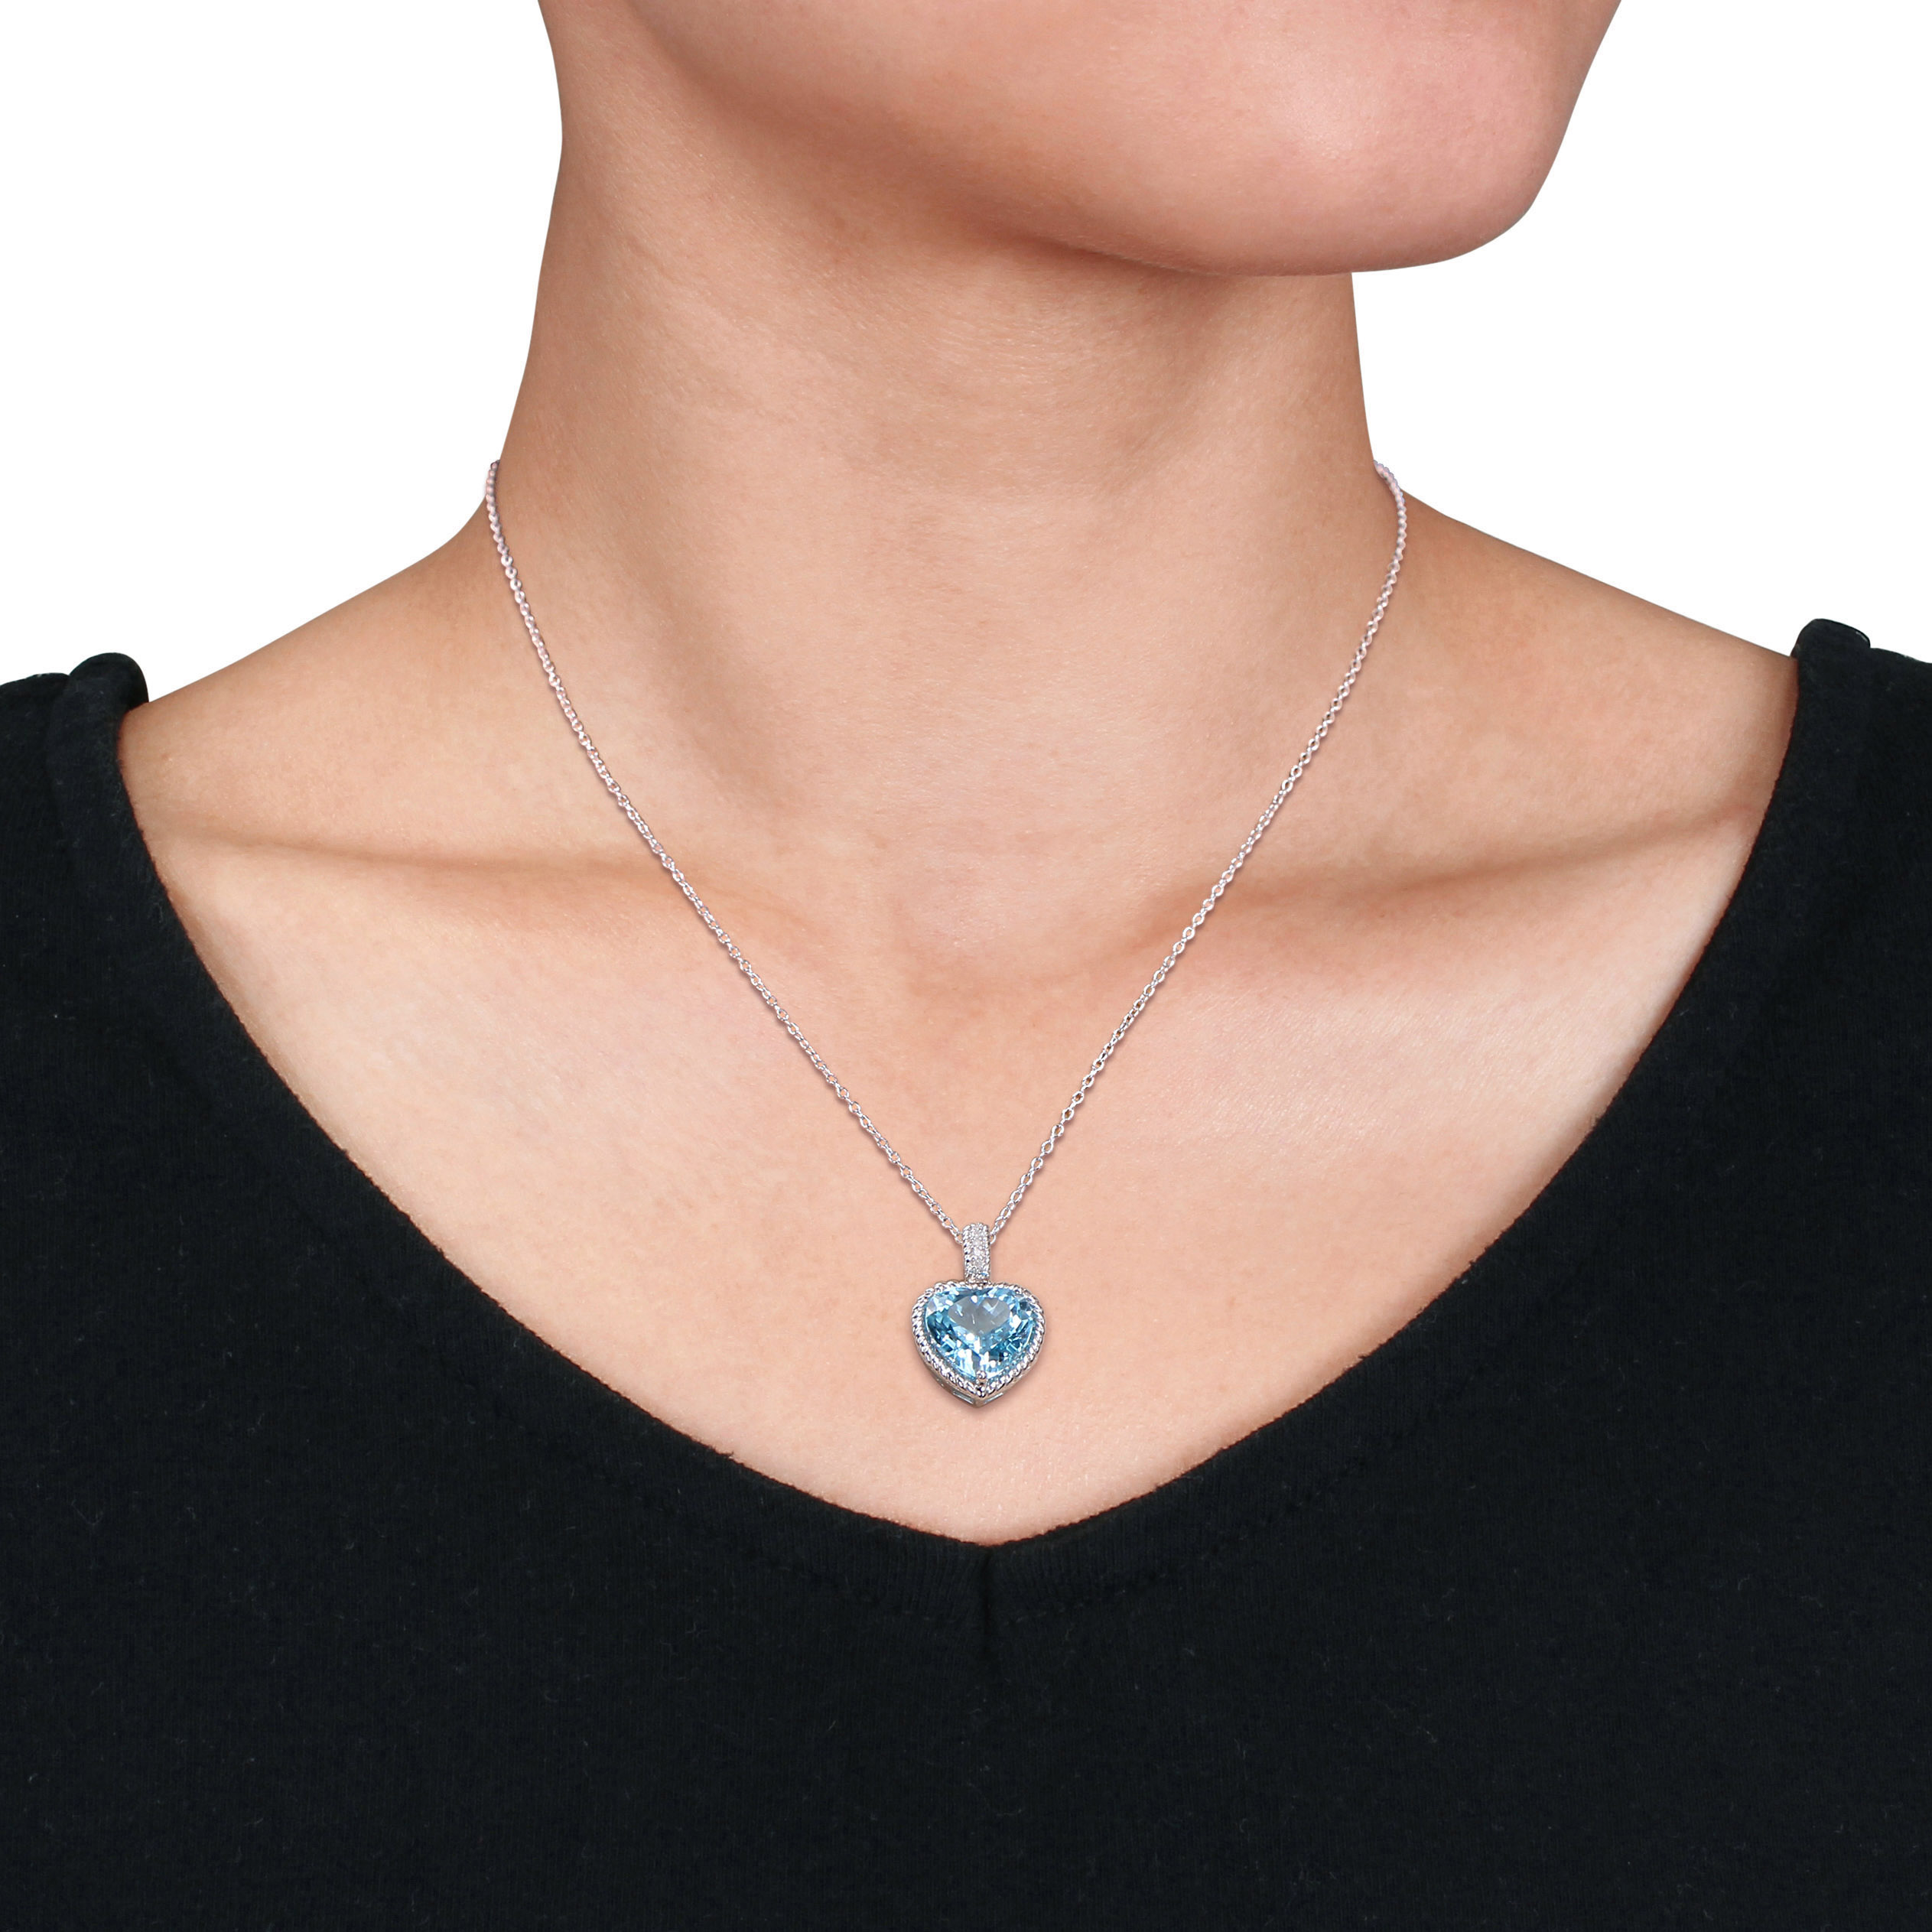 7 CT TGW Blue Topaz and Diamond Heart Pendant With Chain in Sterling Silver